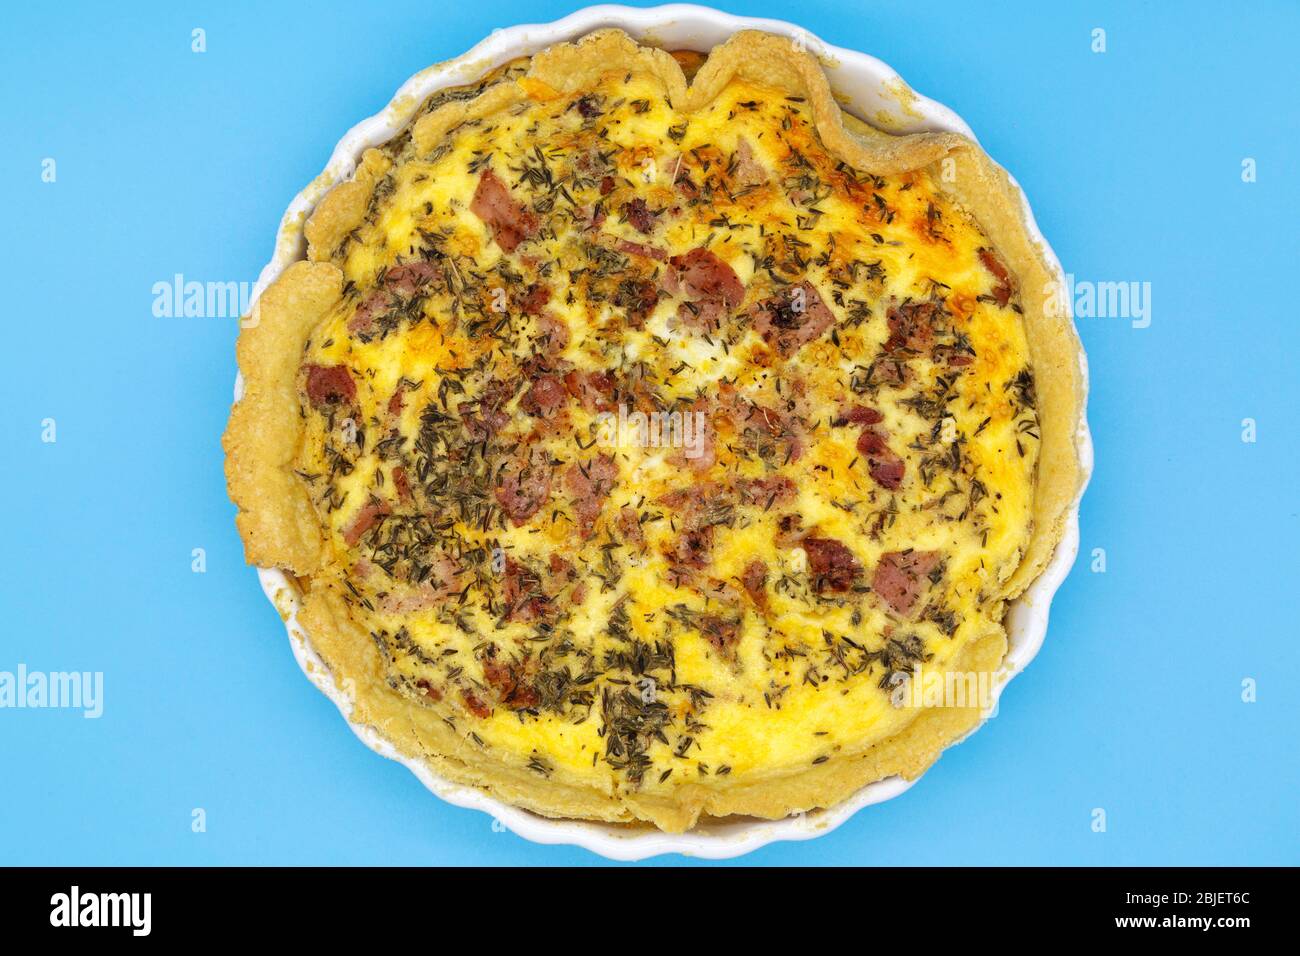 Home-baked Quiche Lorraine. The dish is made with cheese, eggs, cream and bacon and baked in pastry. Stock Photo